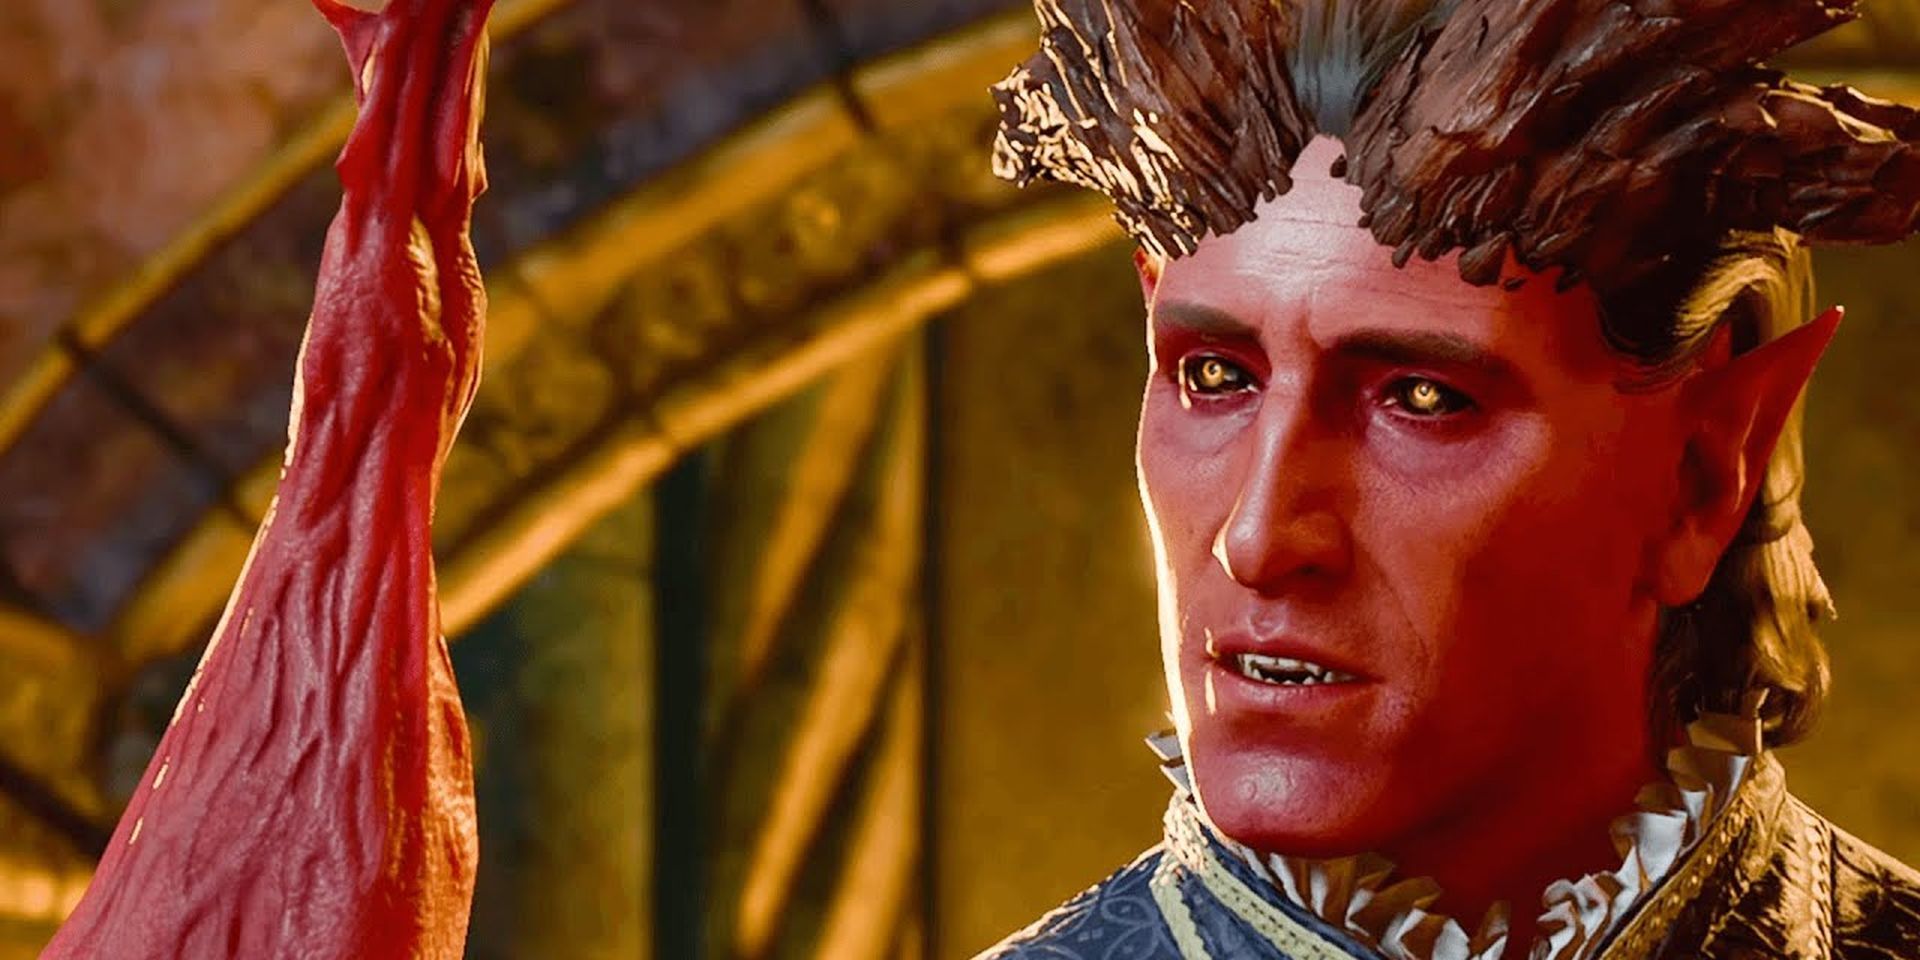 Raphael mid-sentence in his cambion form, with horns and red skin, in a screenshot from Baldur's Gate 3.